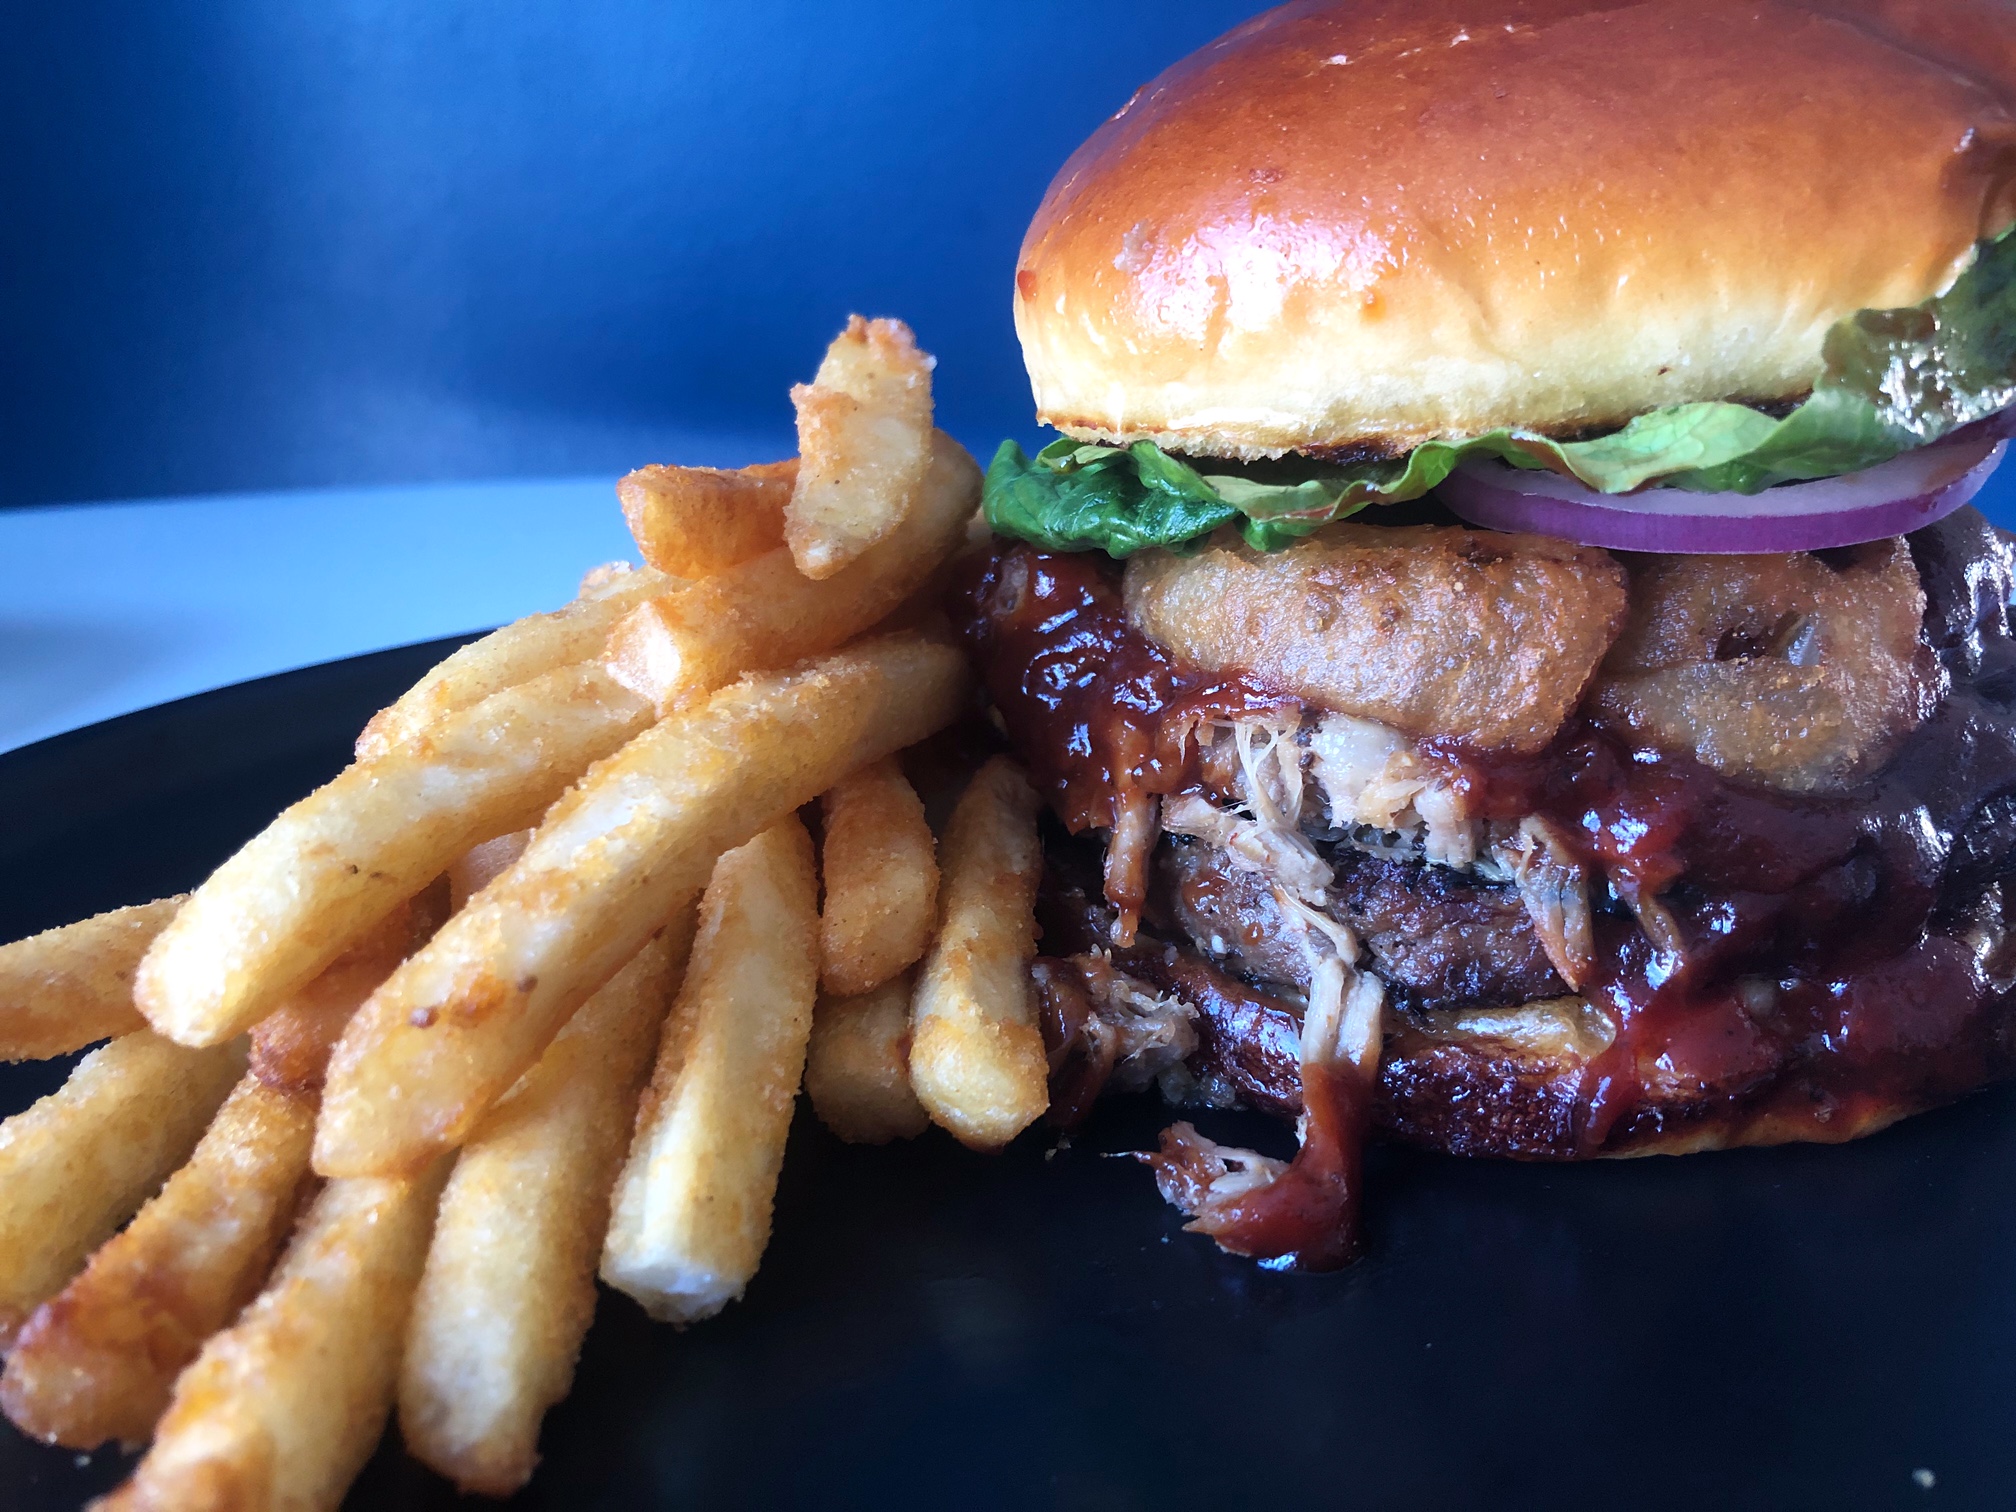 A burger with bbq pulled pork and onion rings sits on a black plate besides a lot of french fries. Photo by Alyssa Buckley.